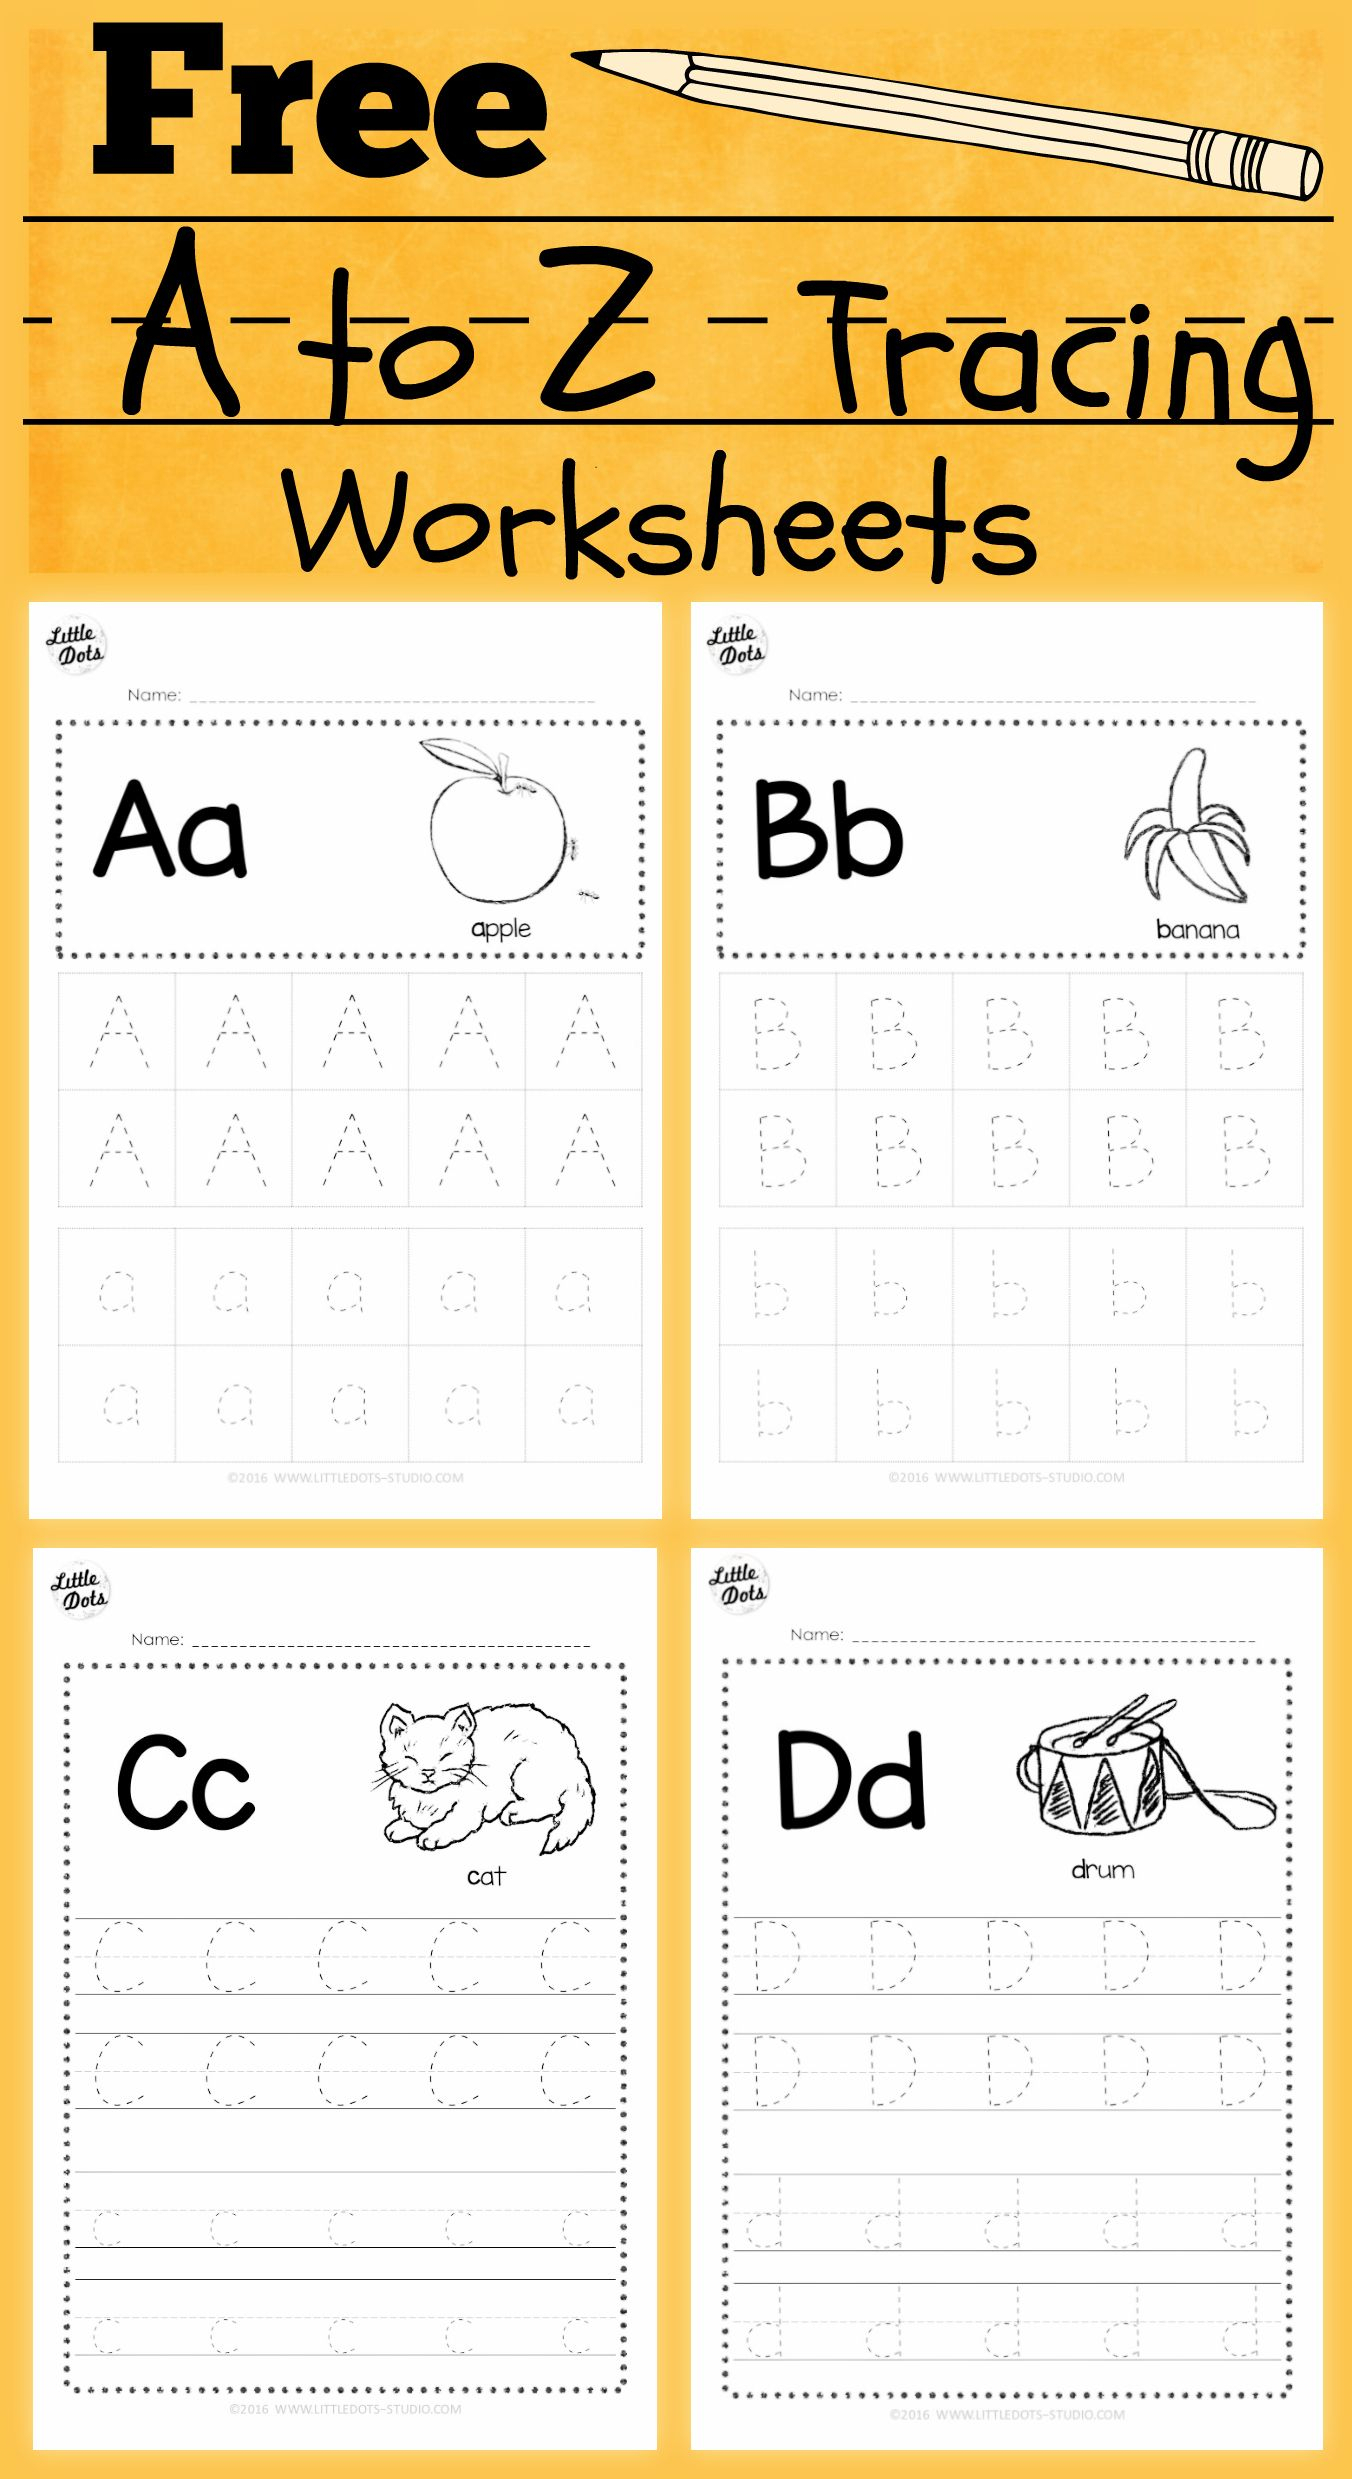 Download Free Alphabet Tracing Worksheets For Letter A To Z intended for Tracing Alphabet Letters Az